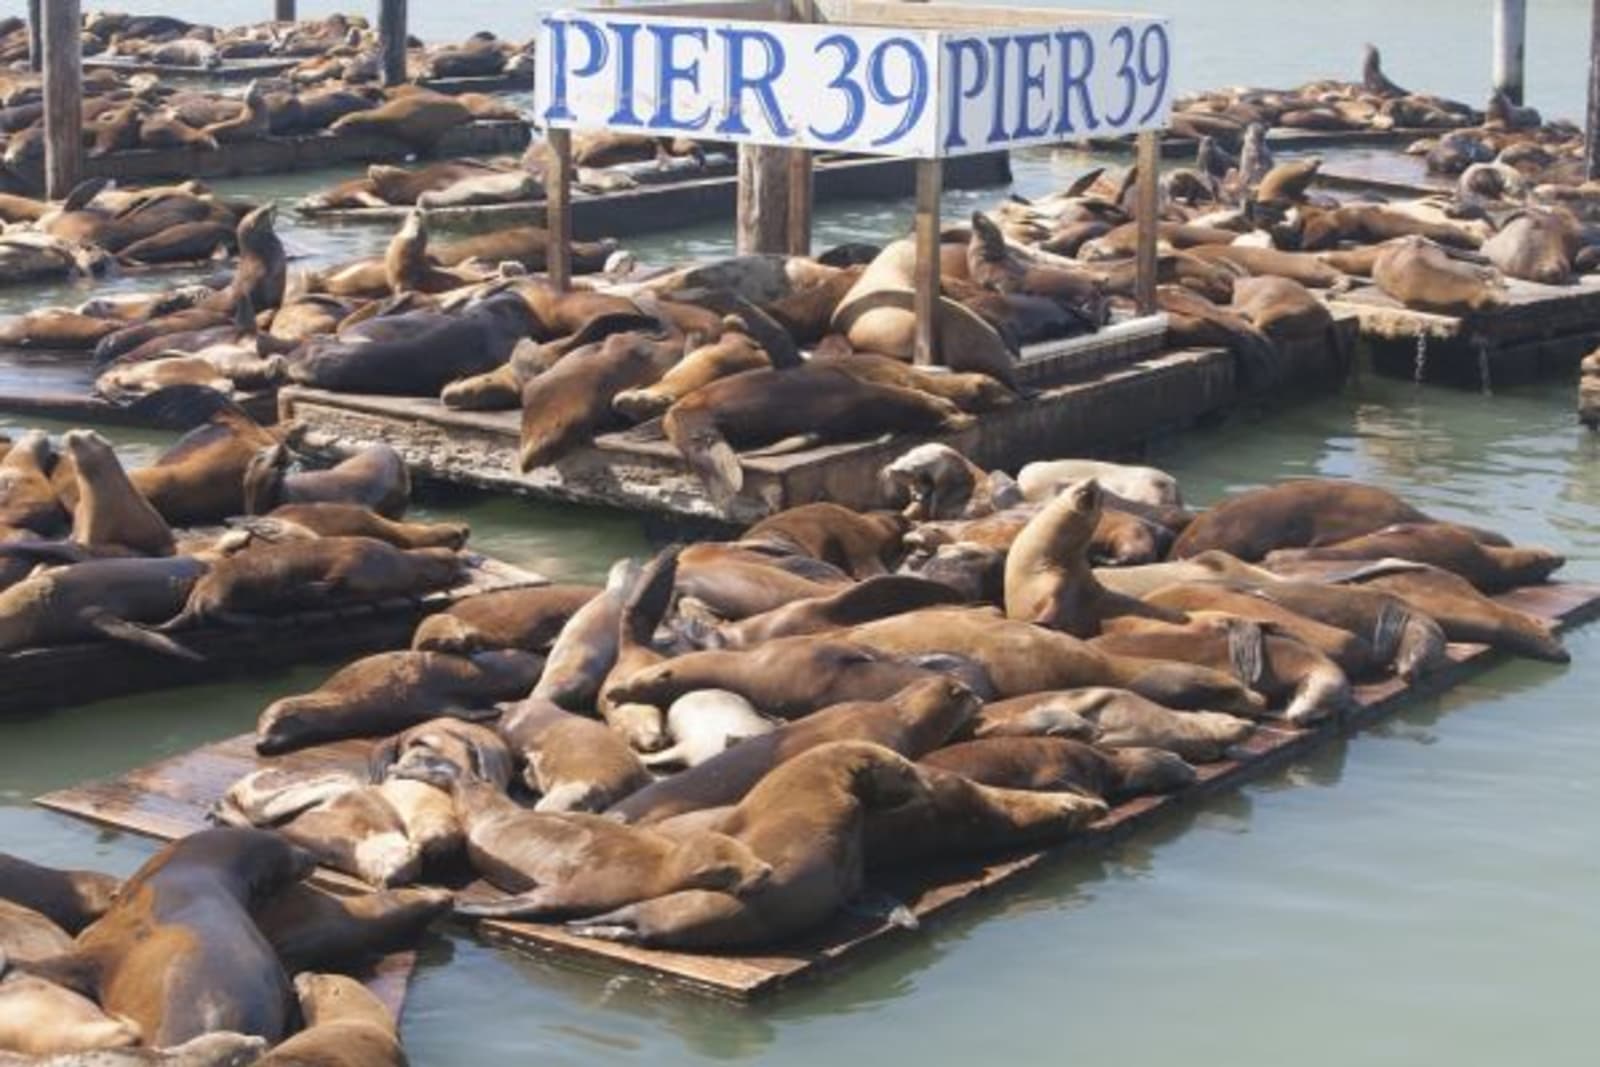 groups of sealions laying in the sun on wooden planks on pier 39